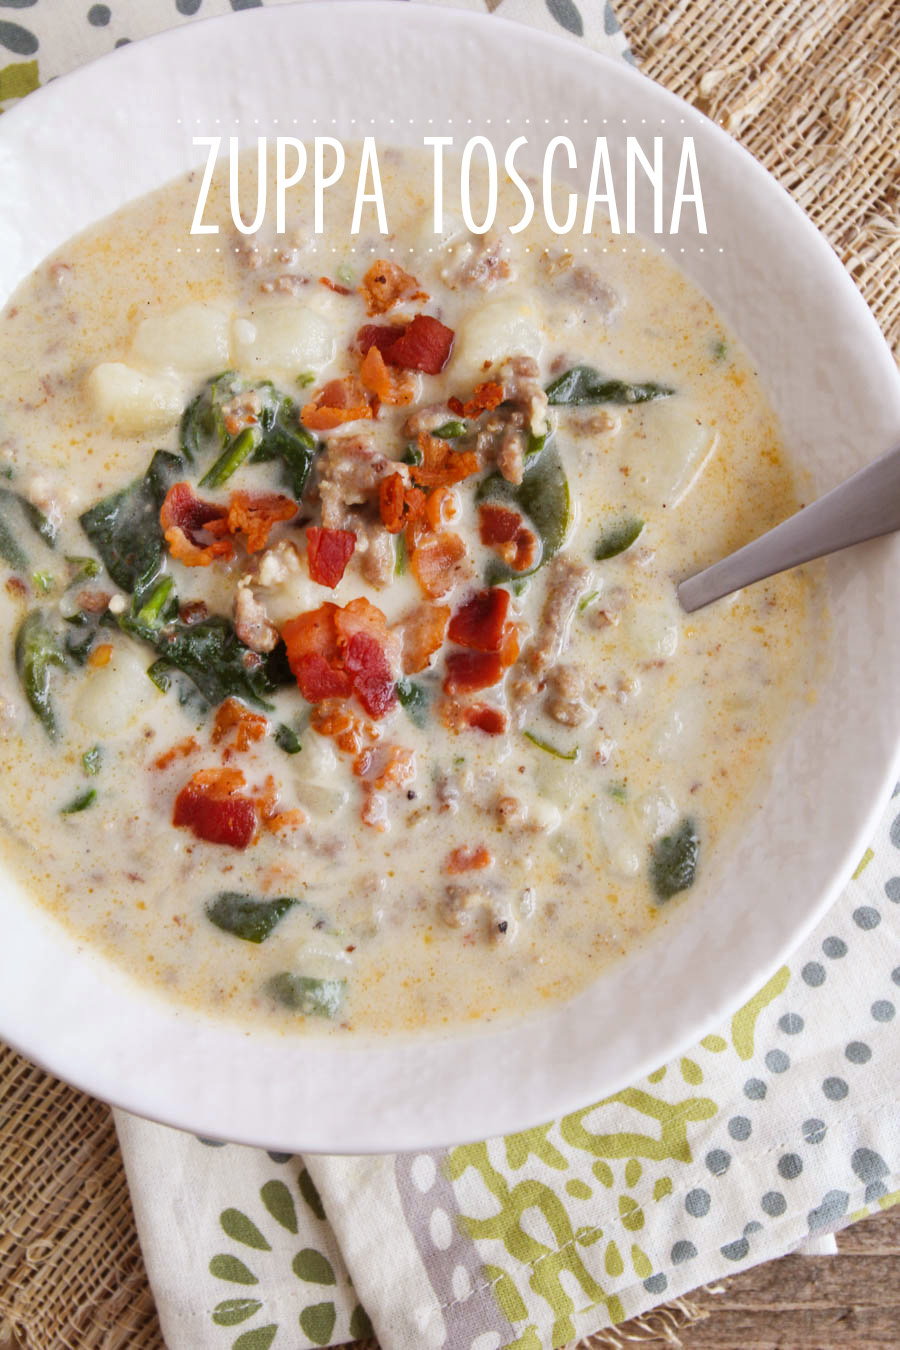 This copycat zuppa toscana is so savory and filling - a delicious combination of flavors!